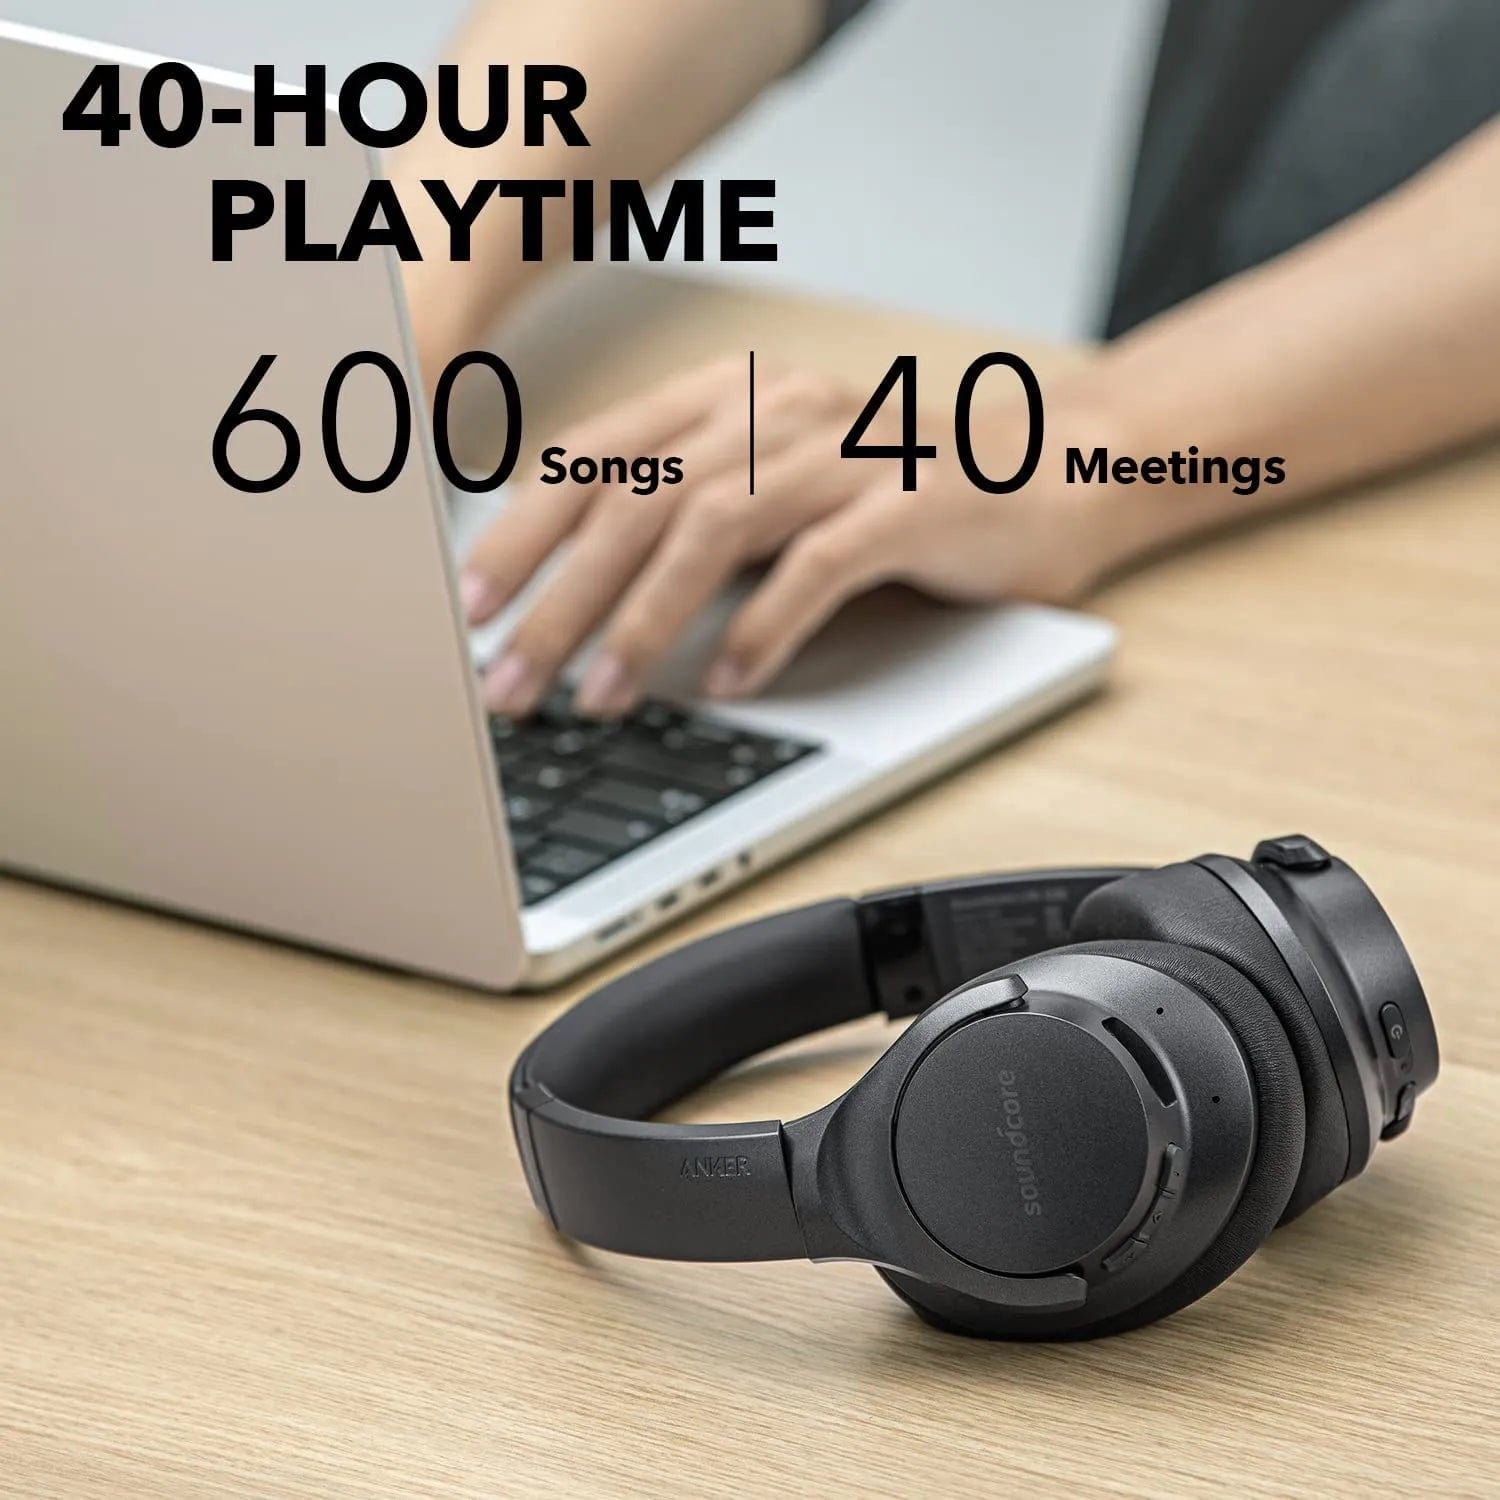 Soundcore China Soundcore, Wireless Over Ear, Version Life Q20, Supports Bluetooth 5.0, Playtime up to 40 Hours, Color Silver